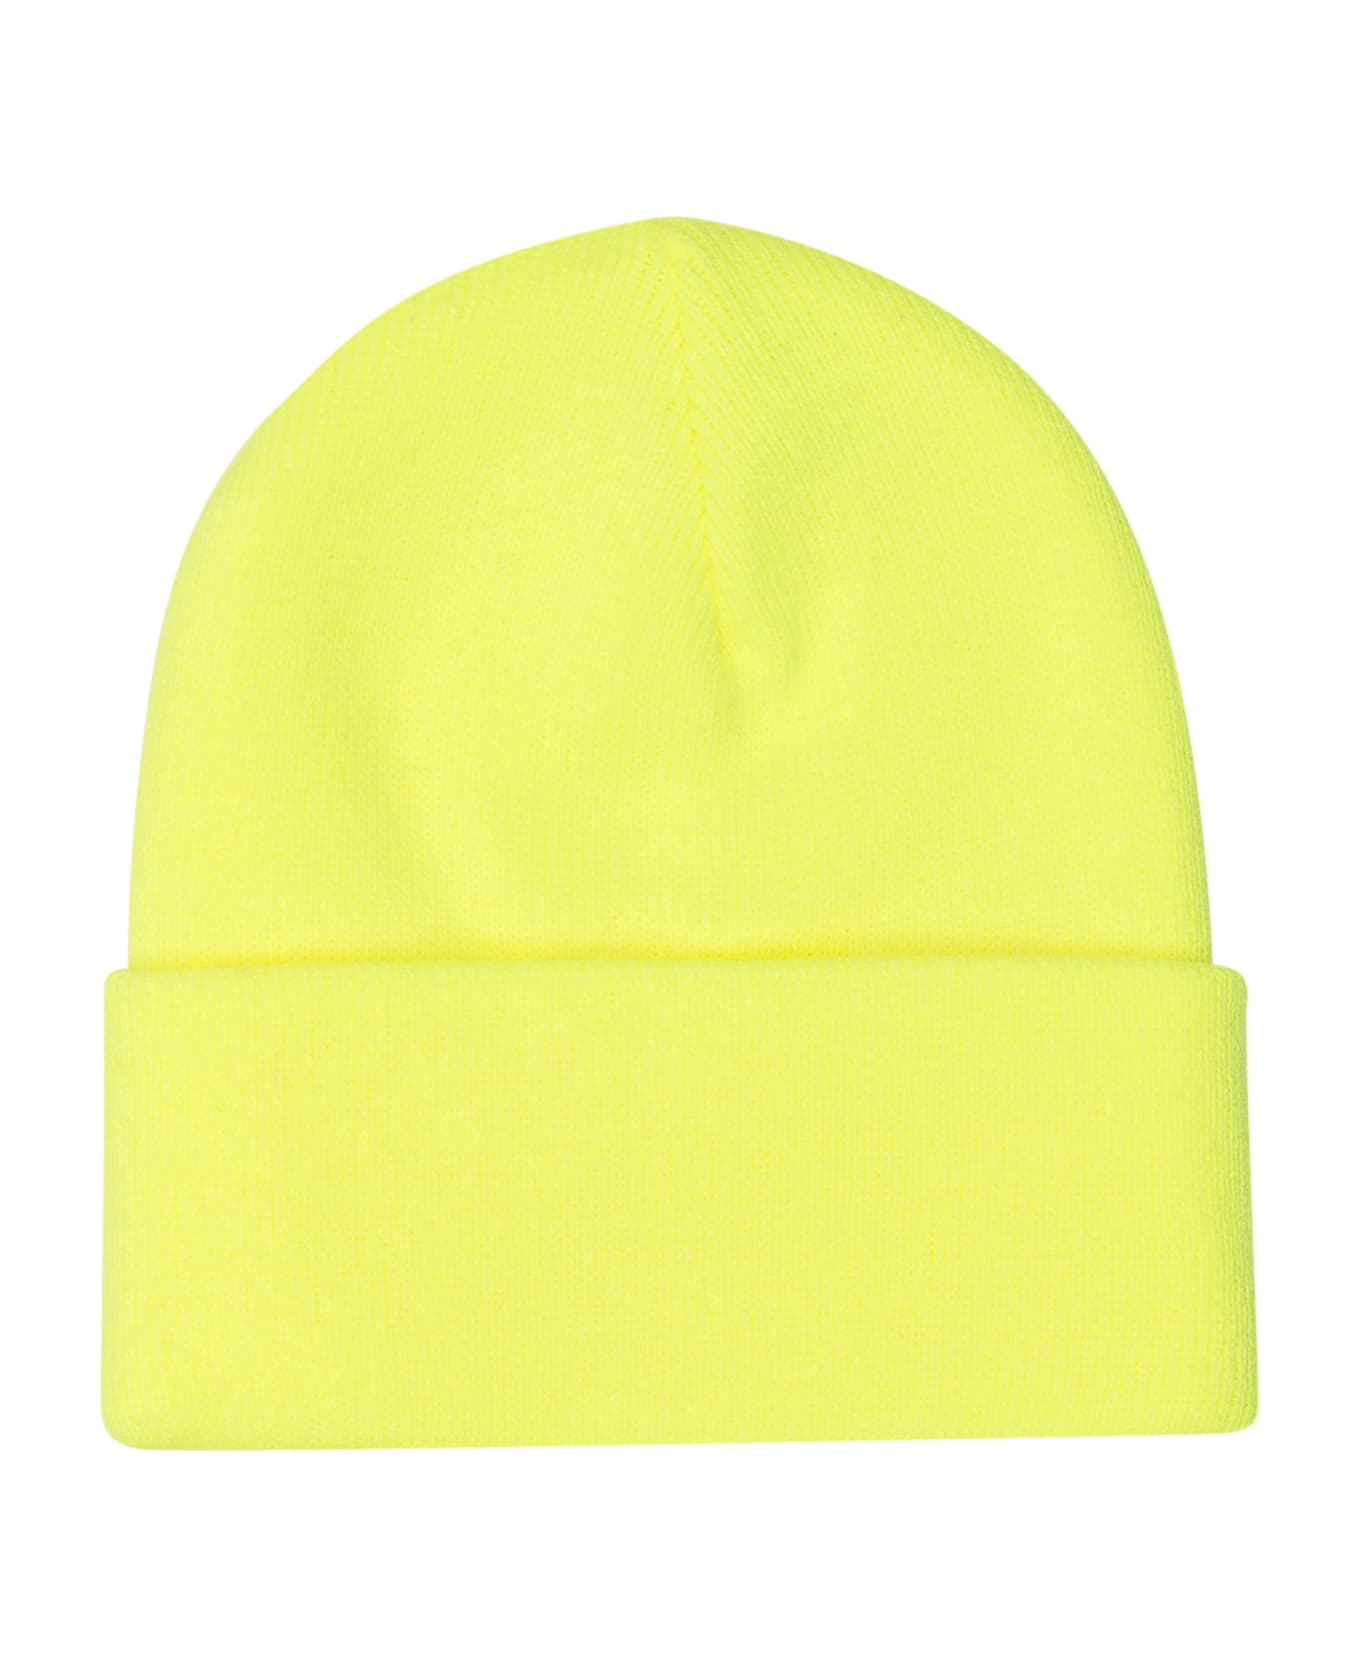 Stussy Hat With Logo - SAFETY YELLOW 帽子